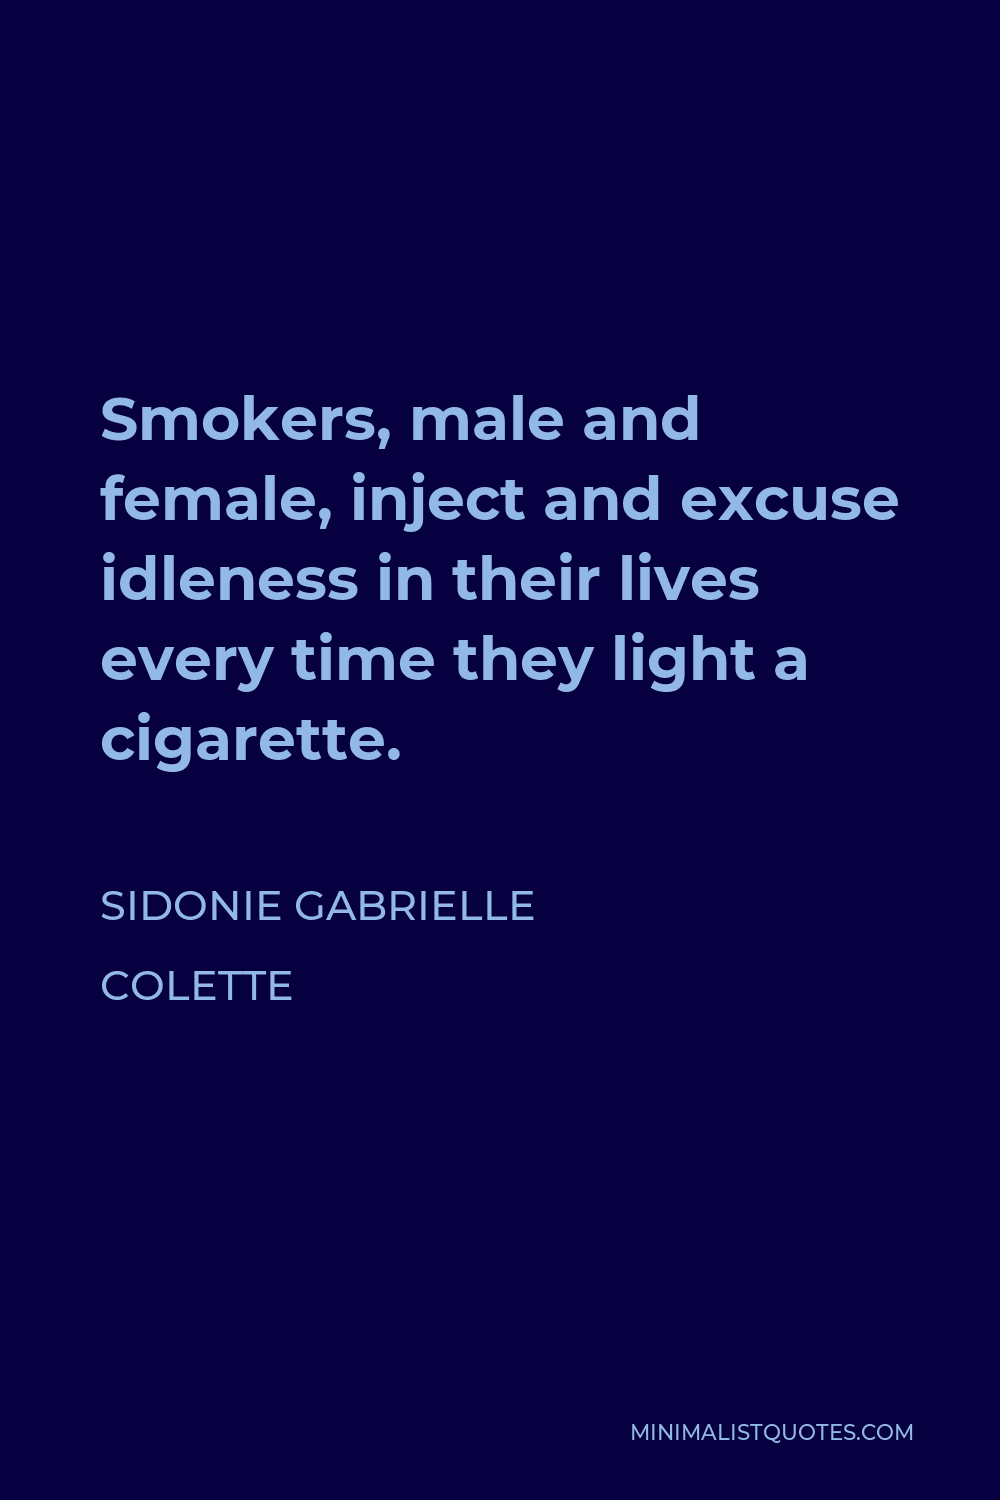 Sidonie Gabrielle Colette Quote - Smokers, male and female, inject and excuse idleness in their lives every time they light a cigarette.